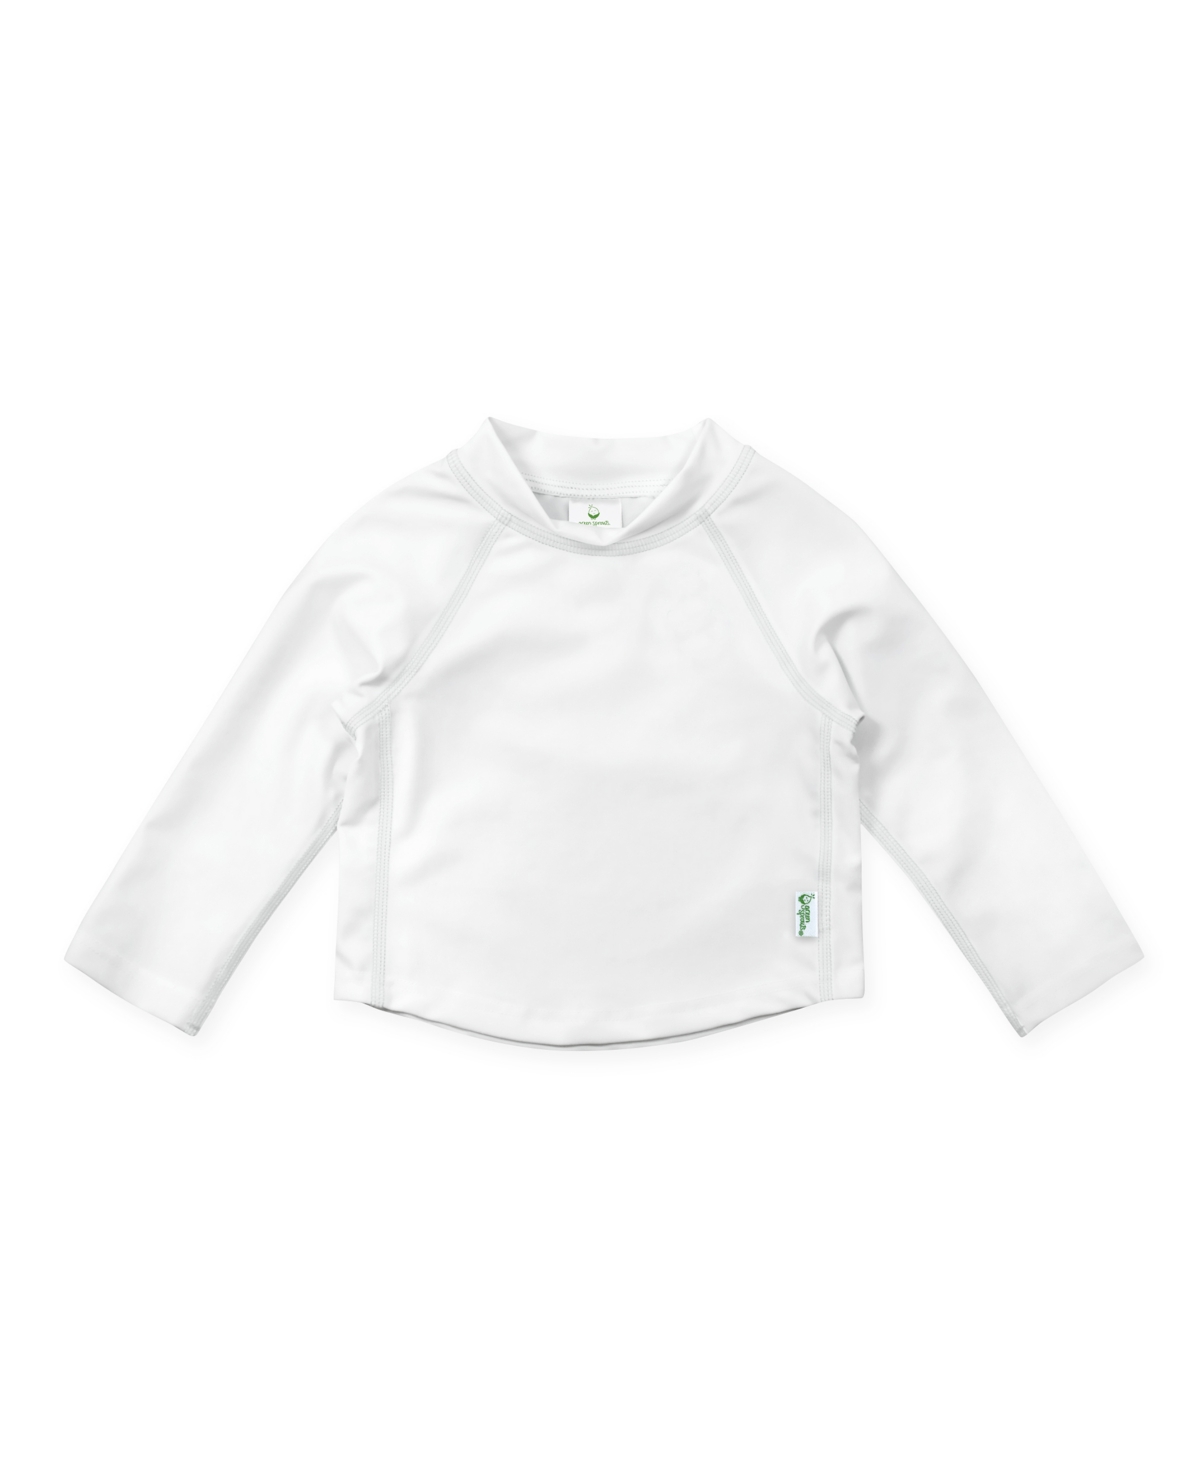 Shop Green Sprouts Baby Boys And Girls Long Sleeve Rashguard Shirt Upf 50 In White